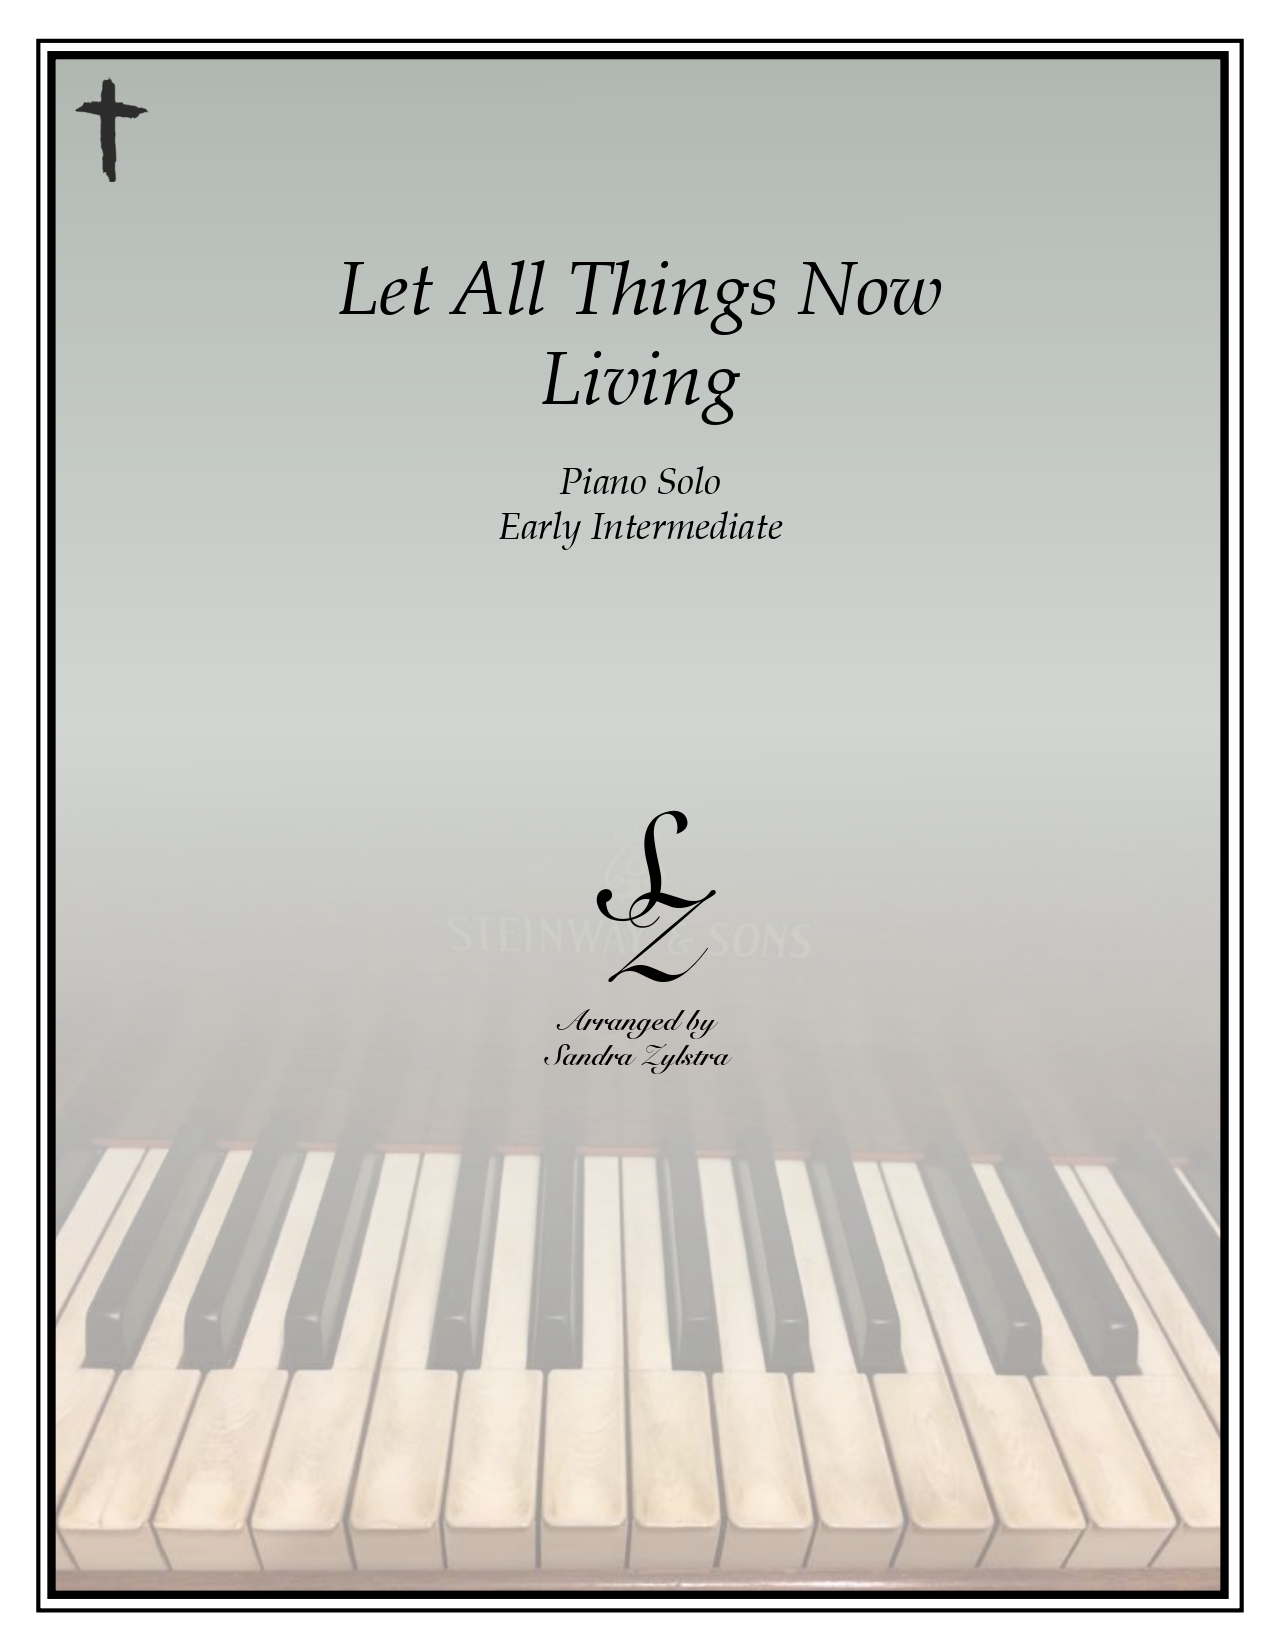 Let All Things Now Living early intermediate piano cover page 00011